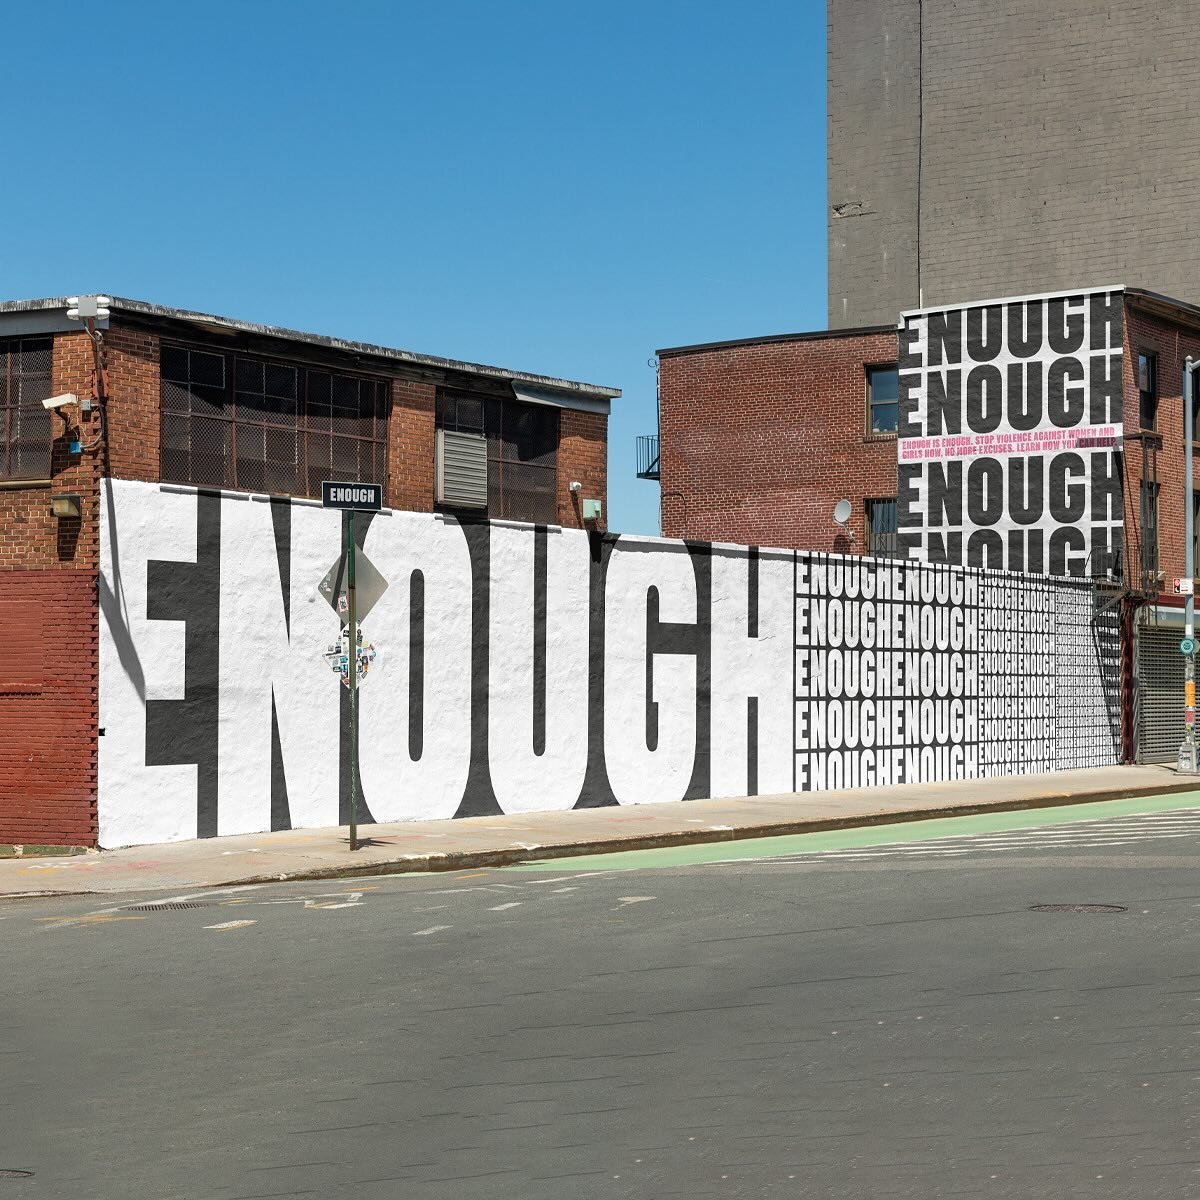 We feel very privileged to have been involved in this project on behalf of treviwomen A city&ndash;wide campaign launched on November 25, for 16 Days of Activism Against Gender-Based Violence.
.
.
The campaign is simple: Enough is enough. Stop violen